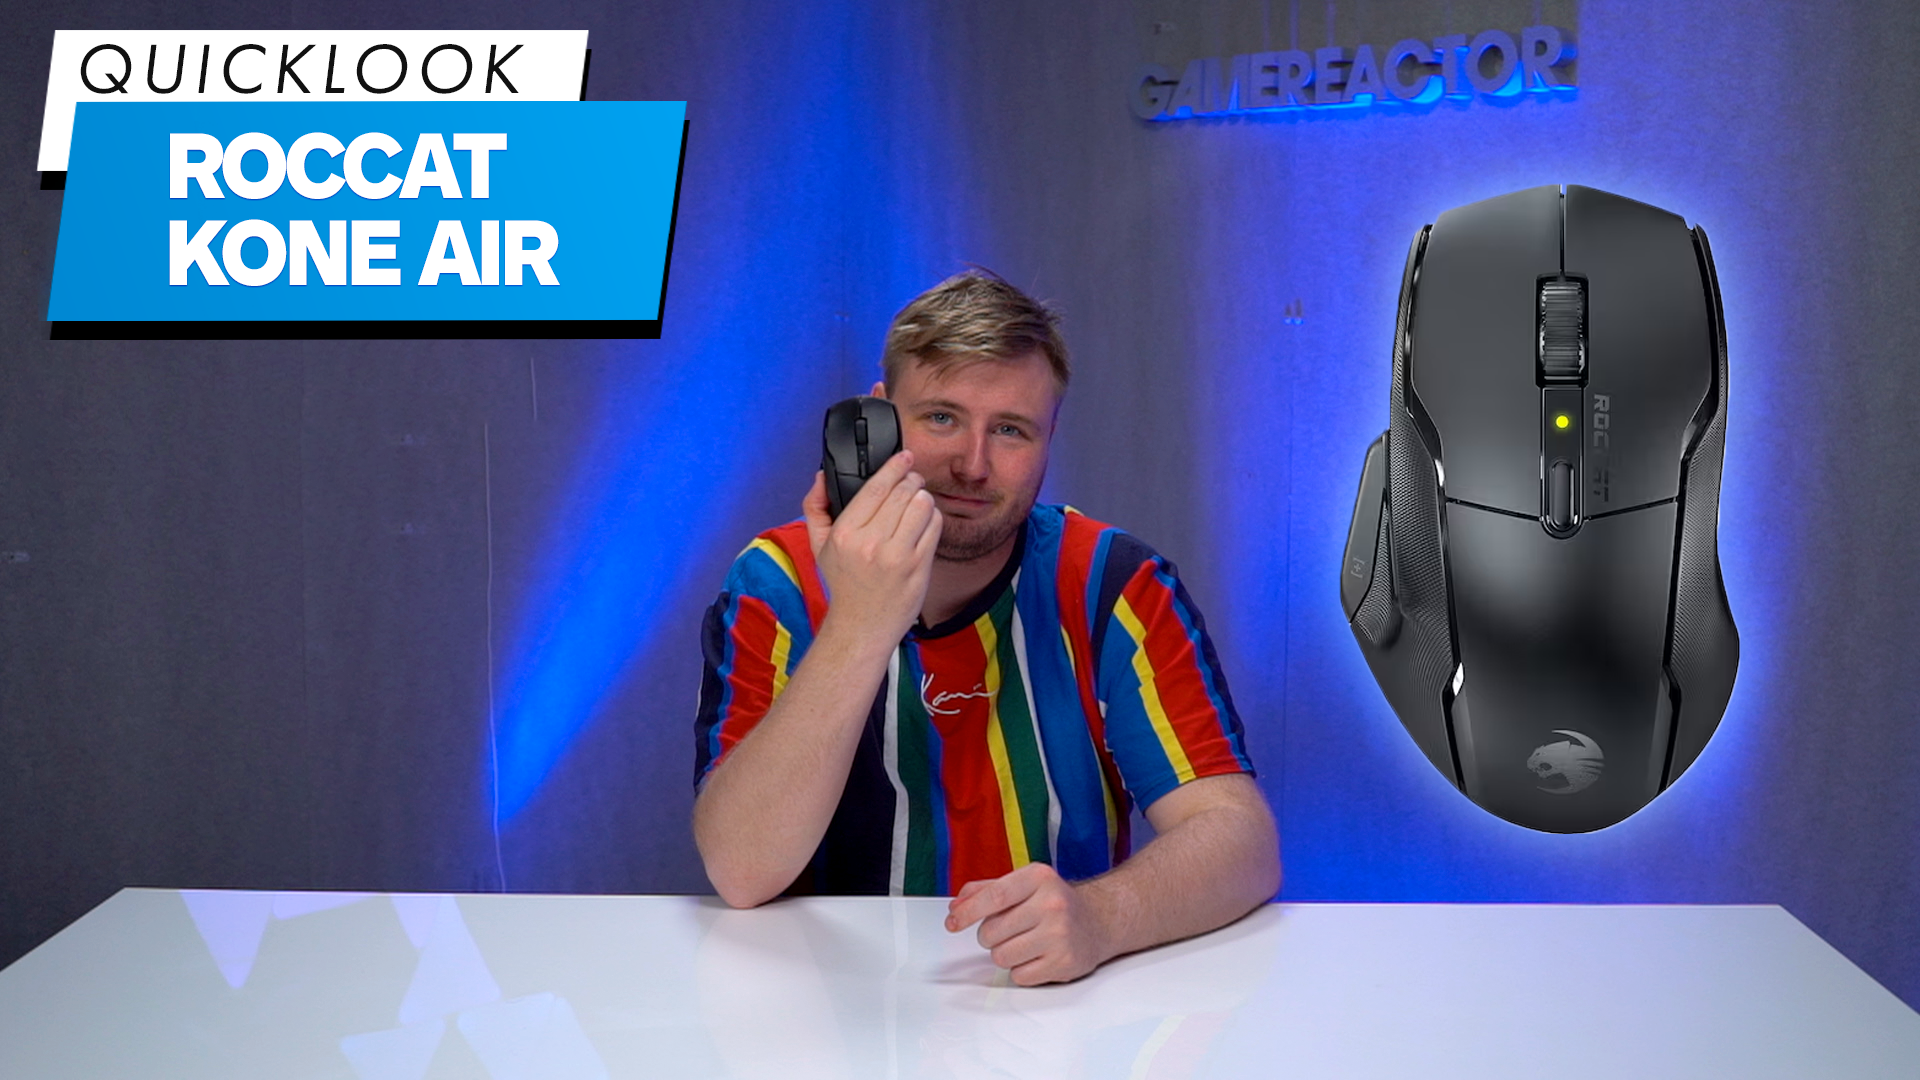 We took a look at the Roccat Kone Air mouse in the latest Quick Look